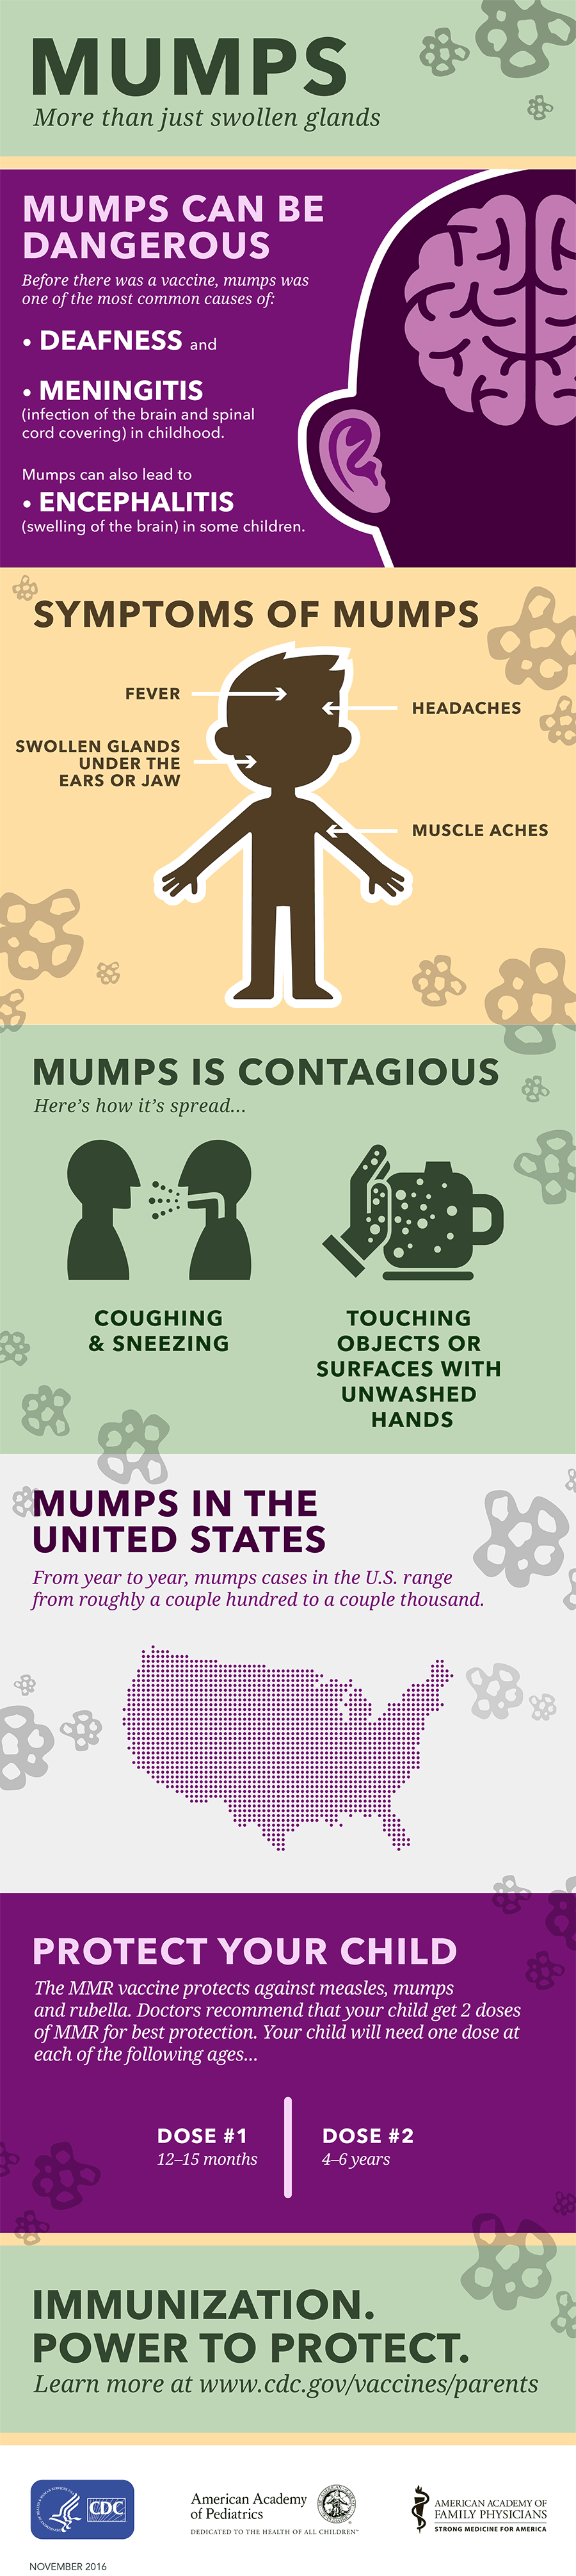 Infographic: Mumps. More than just swollen glands.